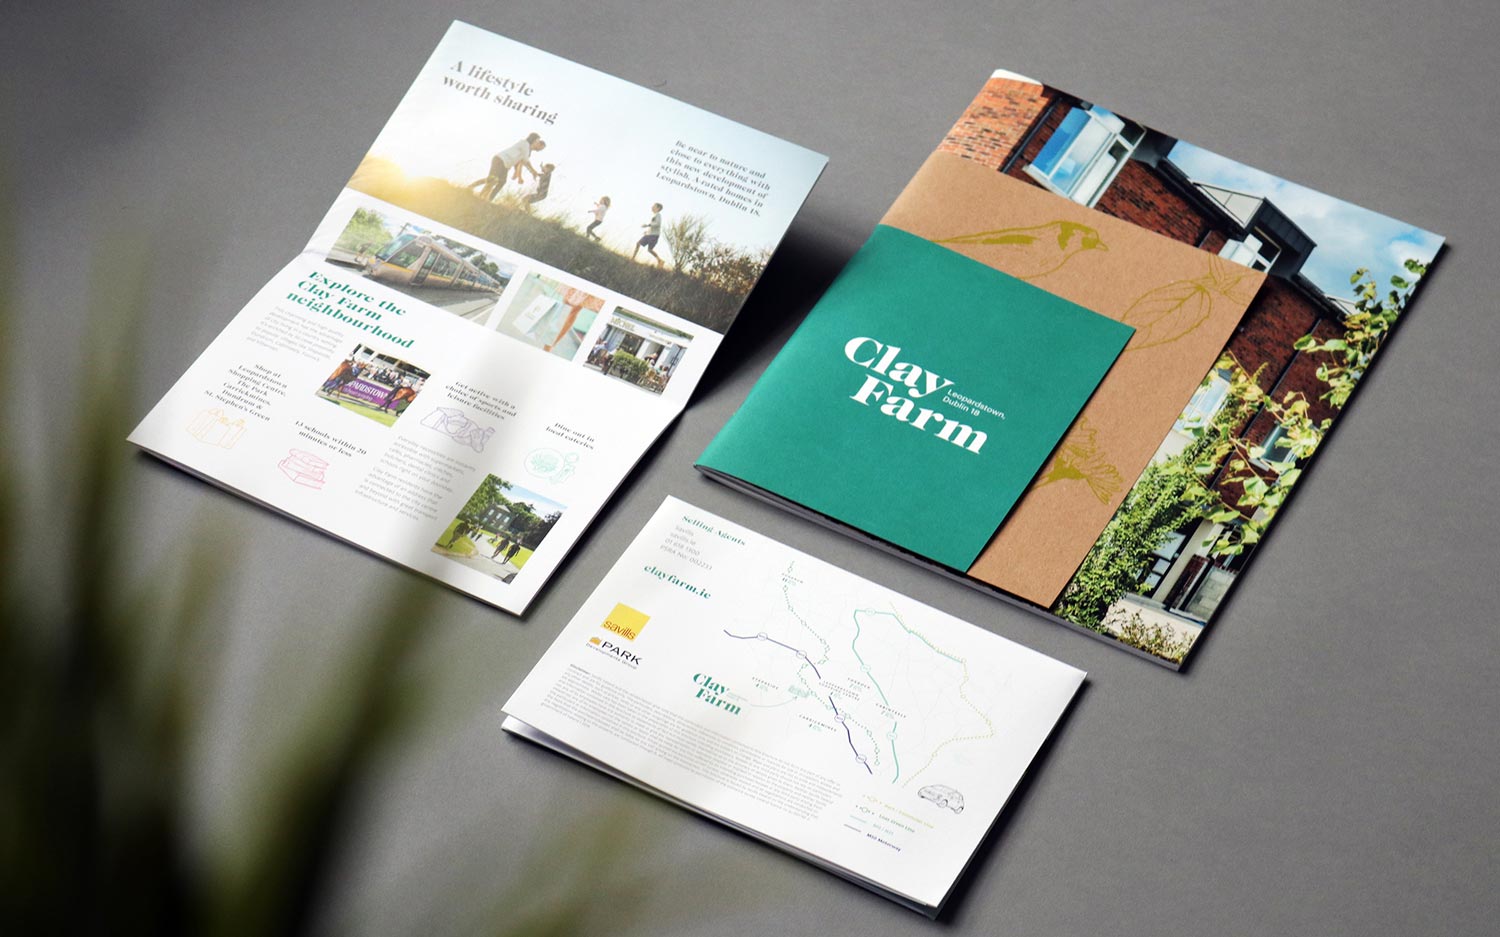 Brochures custom designed to display visitor information for Clay Farm